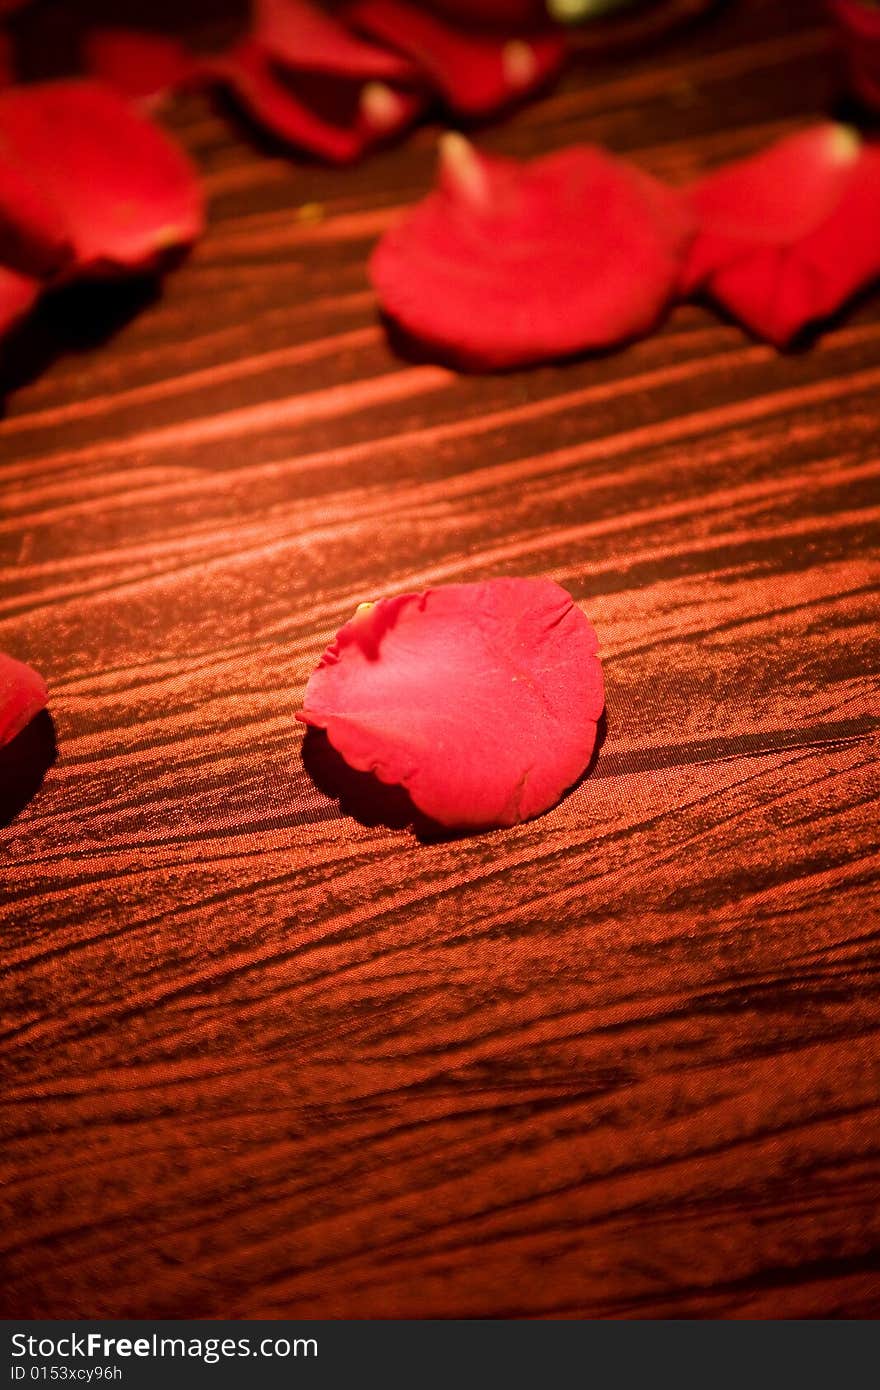 Red rose petals spread on the table for special occasion